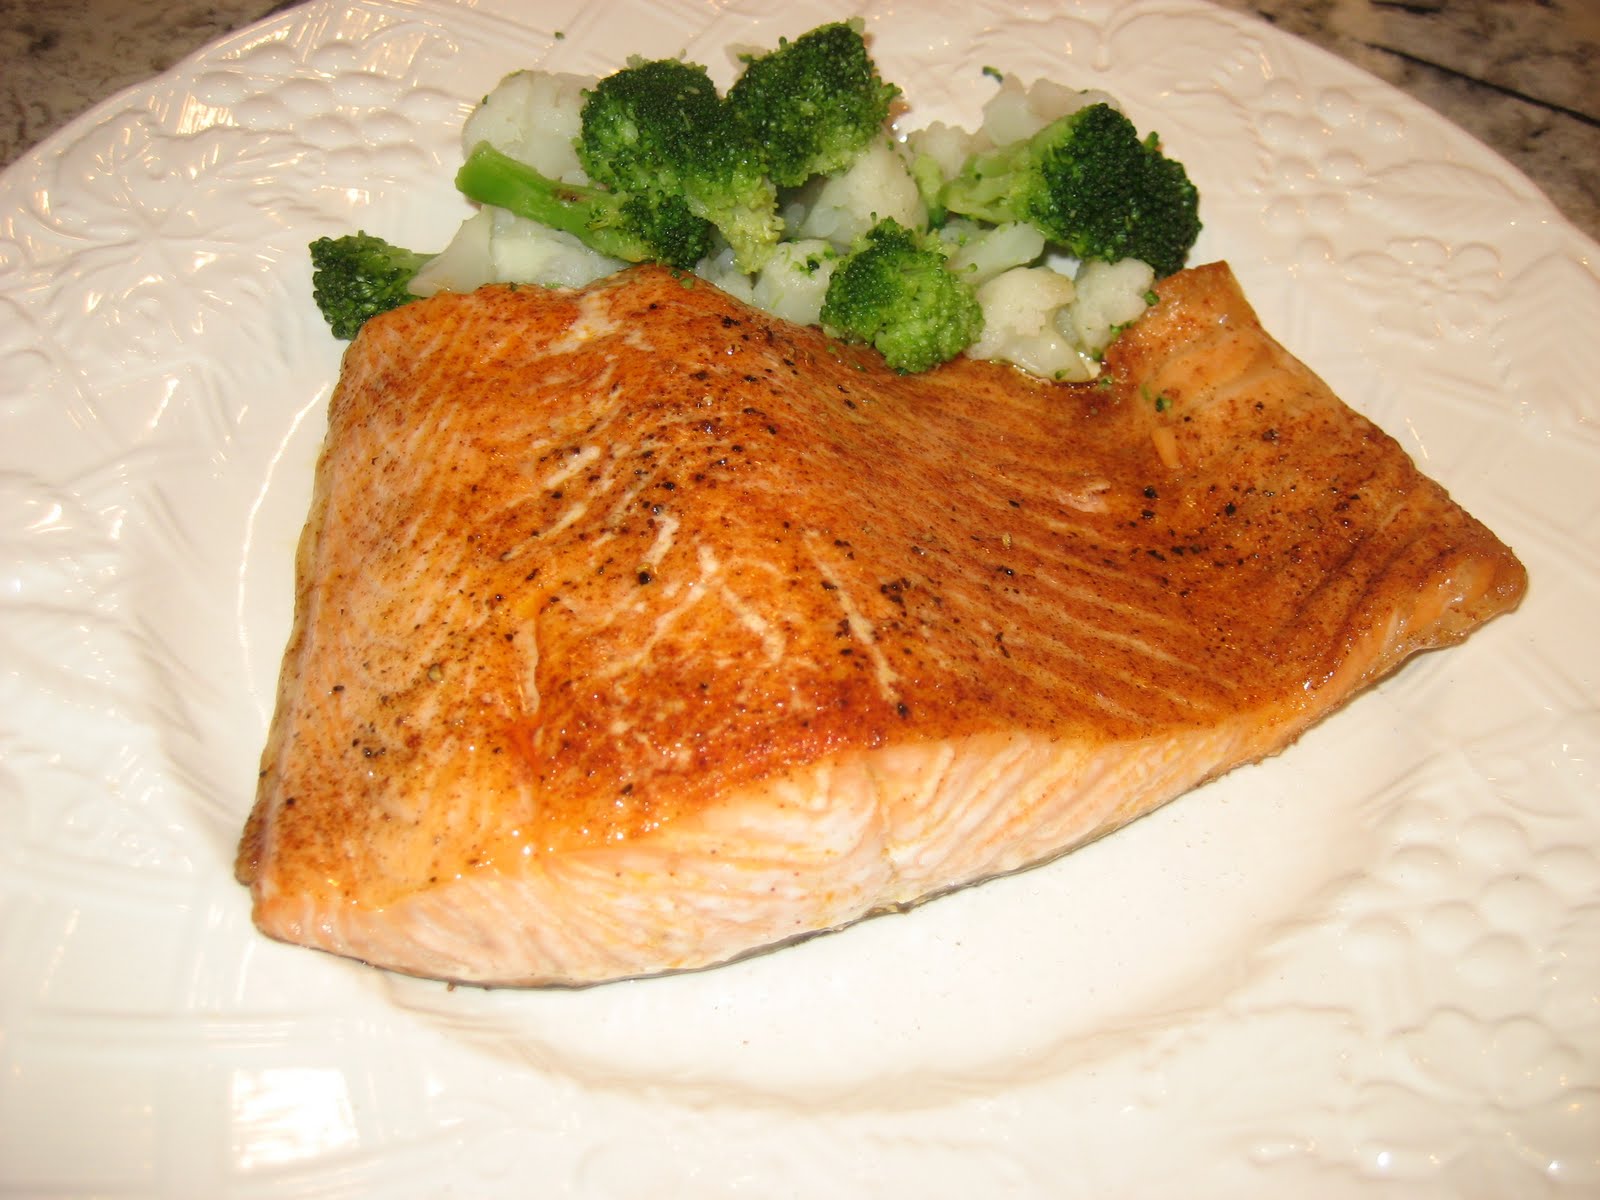 Everything Tasty from My Kitchen: Oven Roasted Salmon